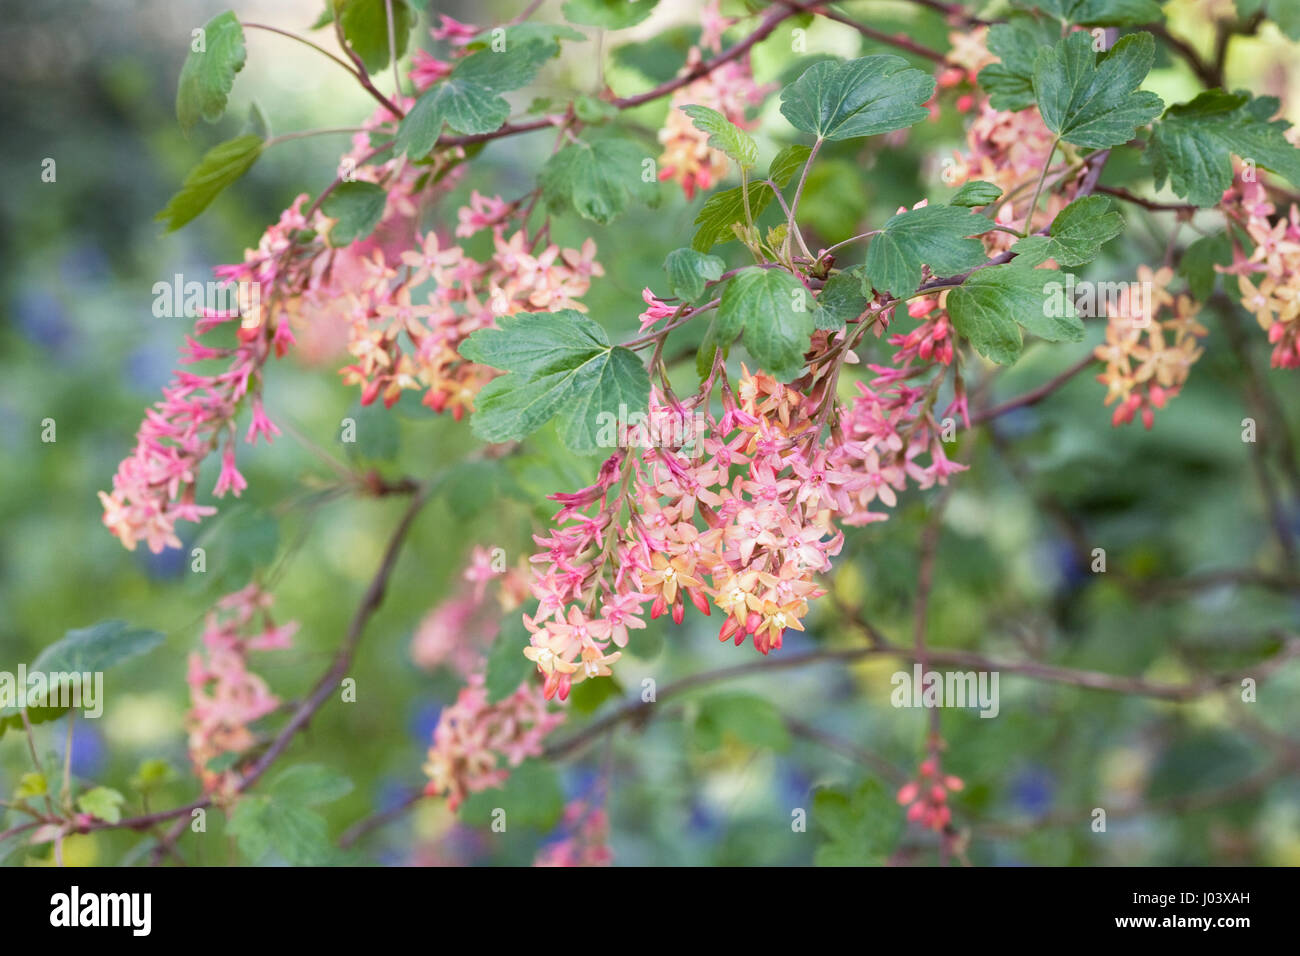 Ribes x beatonii flowers in Spring. Stock Photo